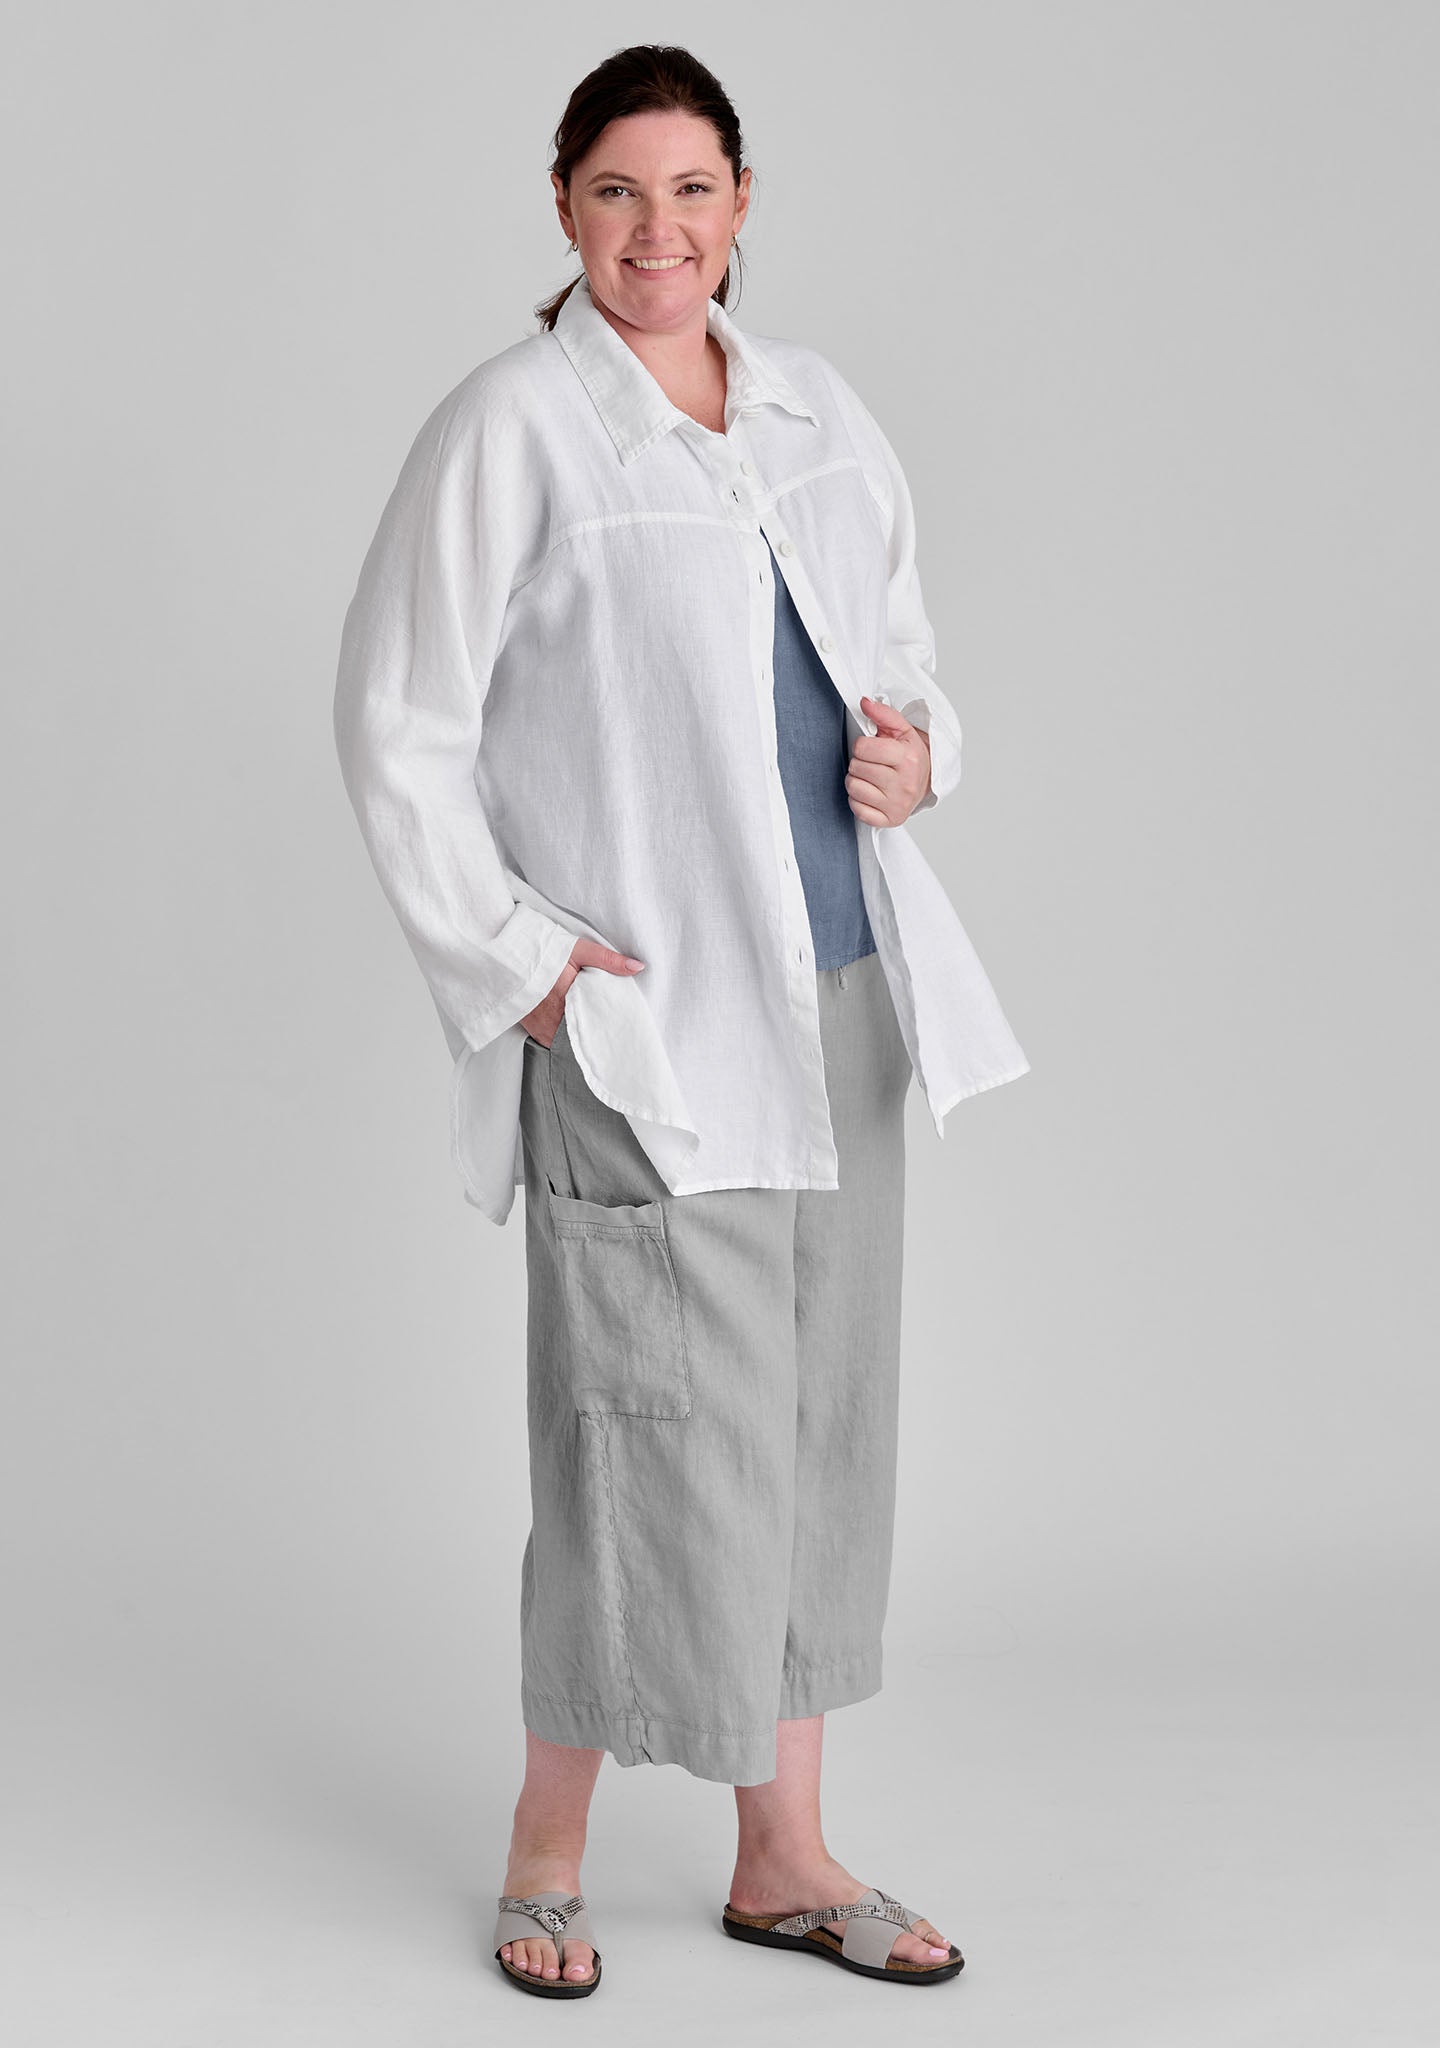 FLAX linen shirt in white with linen tank in blue and linen pants in grey